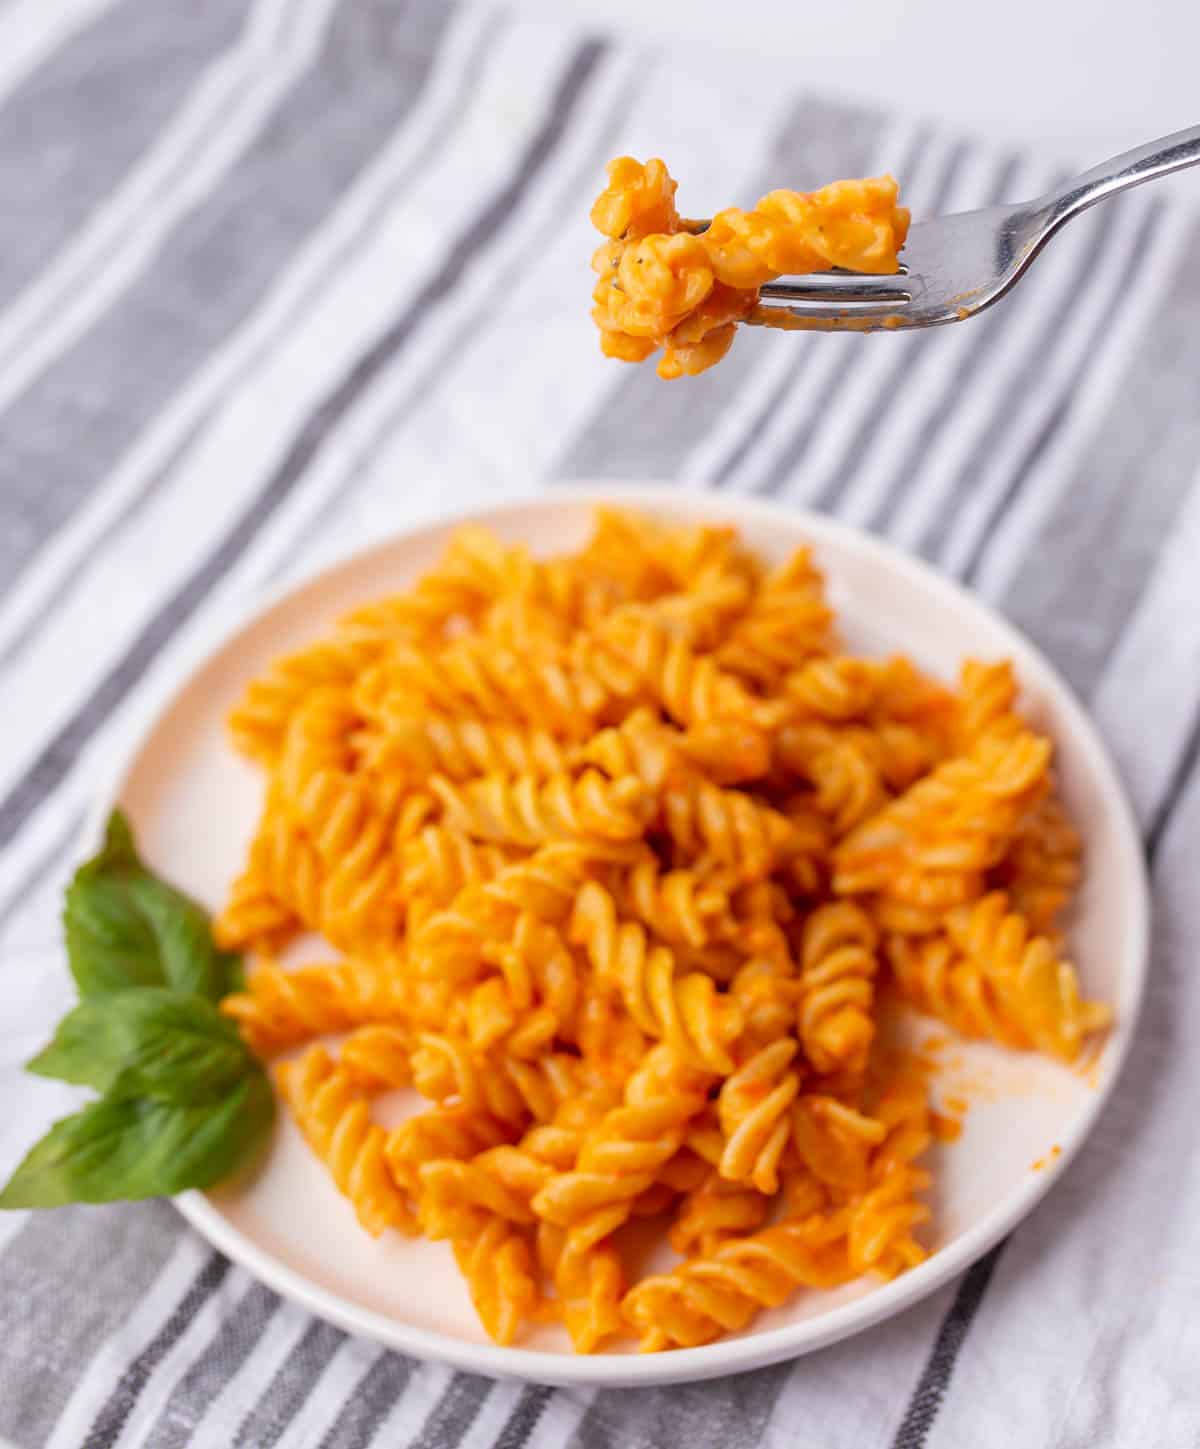 Fork holding a few pieces of pasta with roasted pepper sauce.